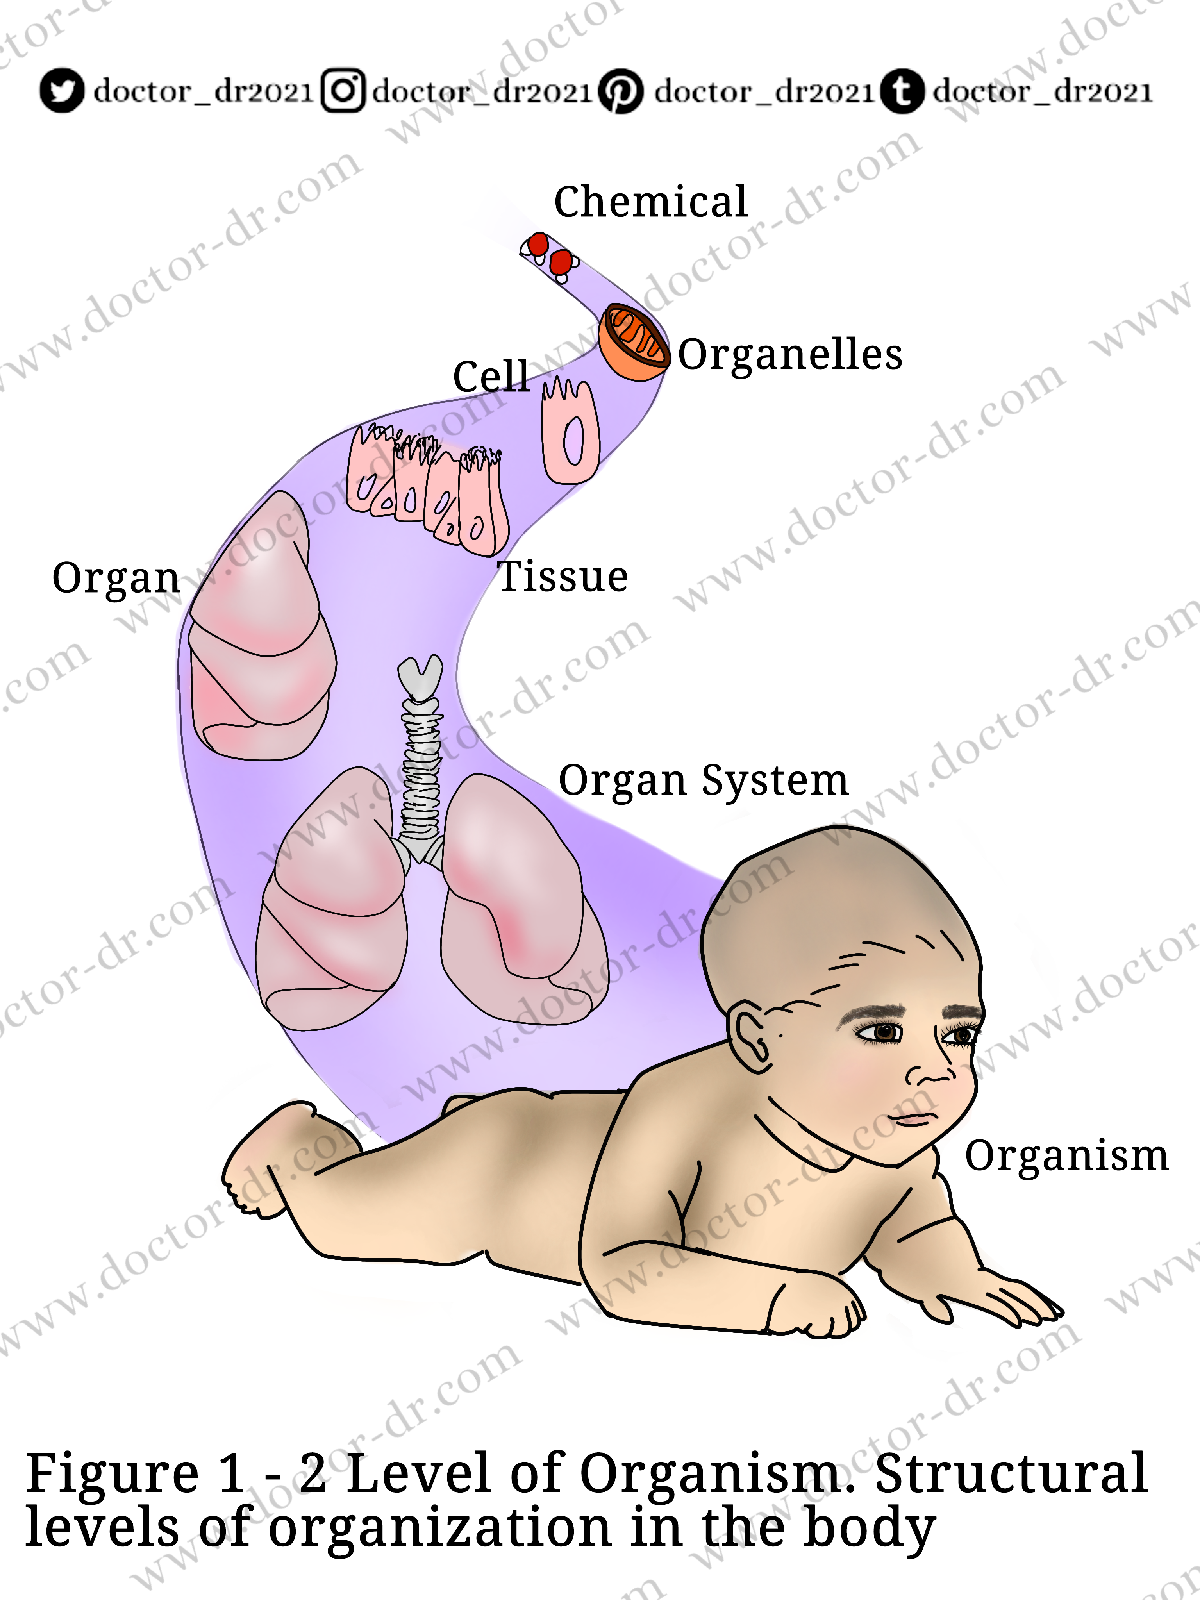 Levels of Organization - Anatomy and Physiology by Doctor-dr